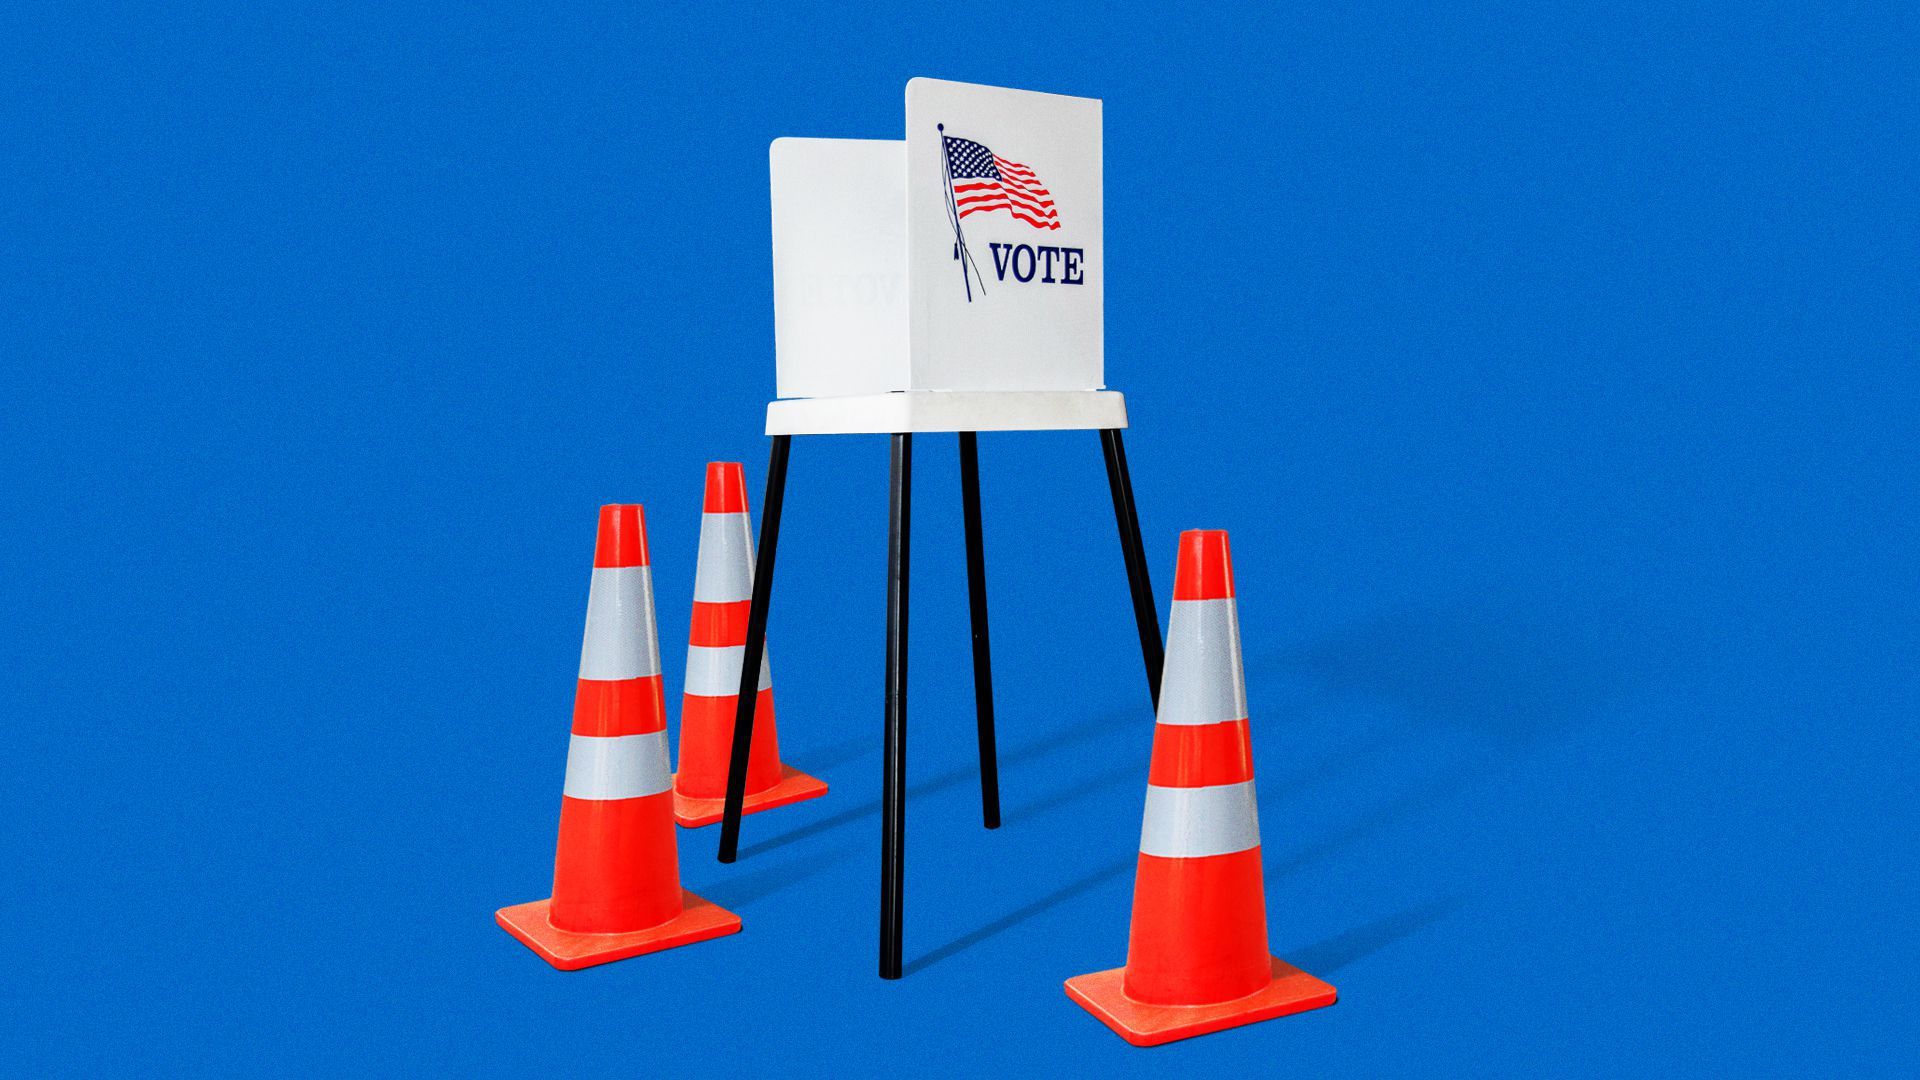 An illustration shows a voting booth blocked off by traffic cones.